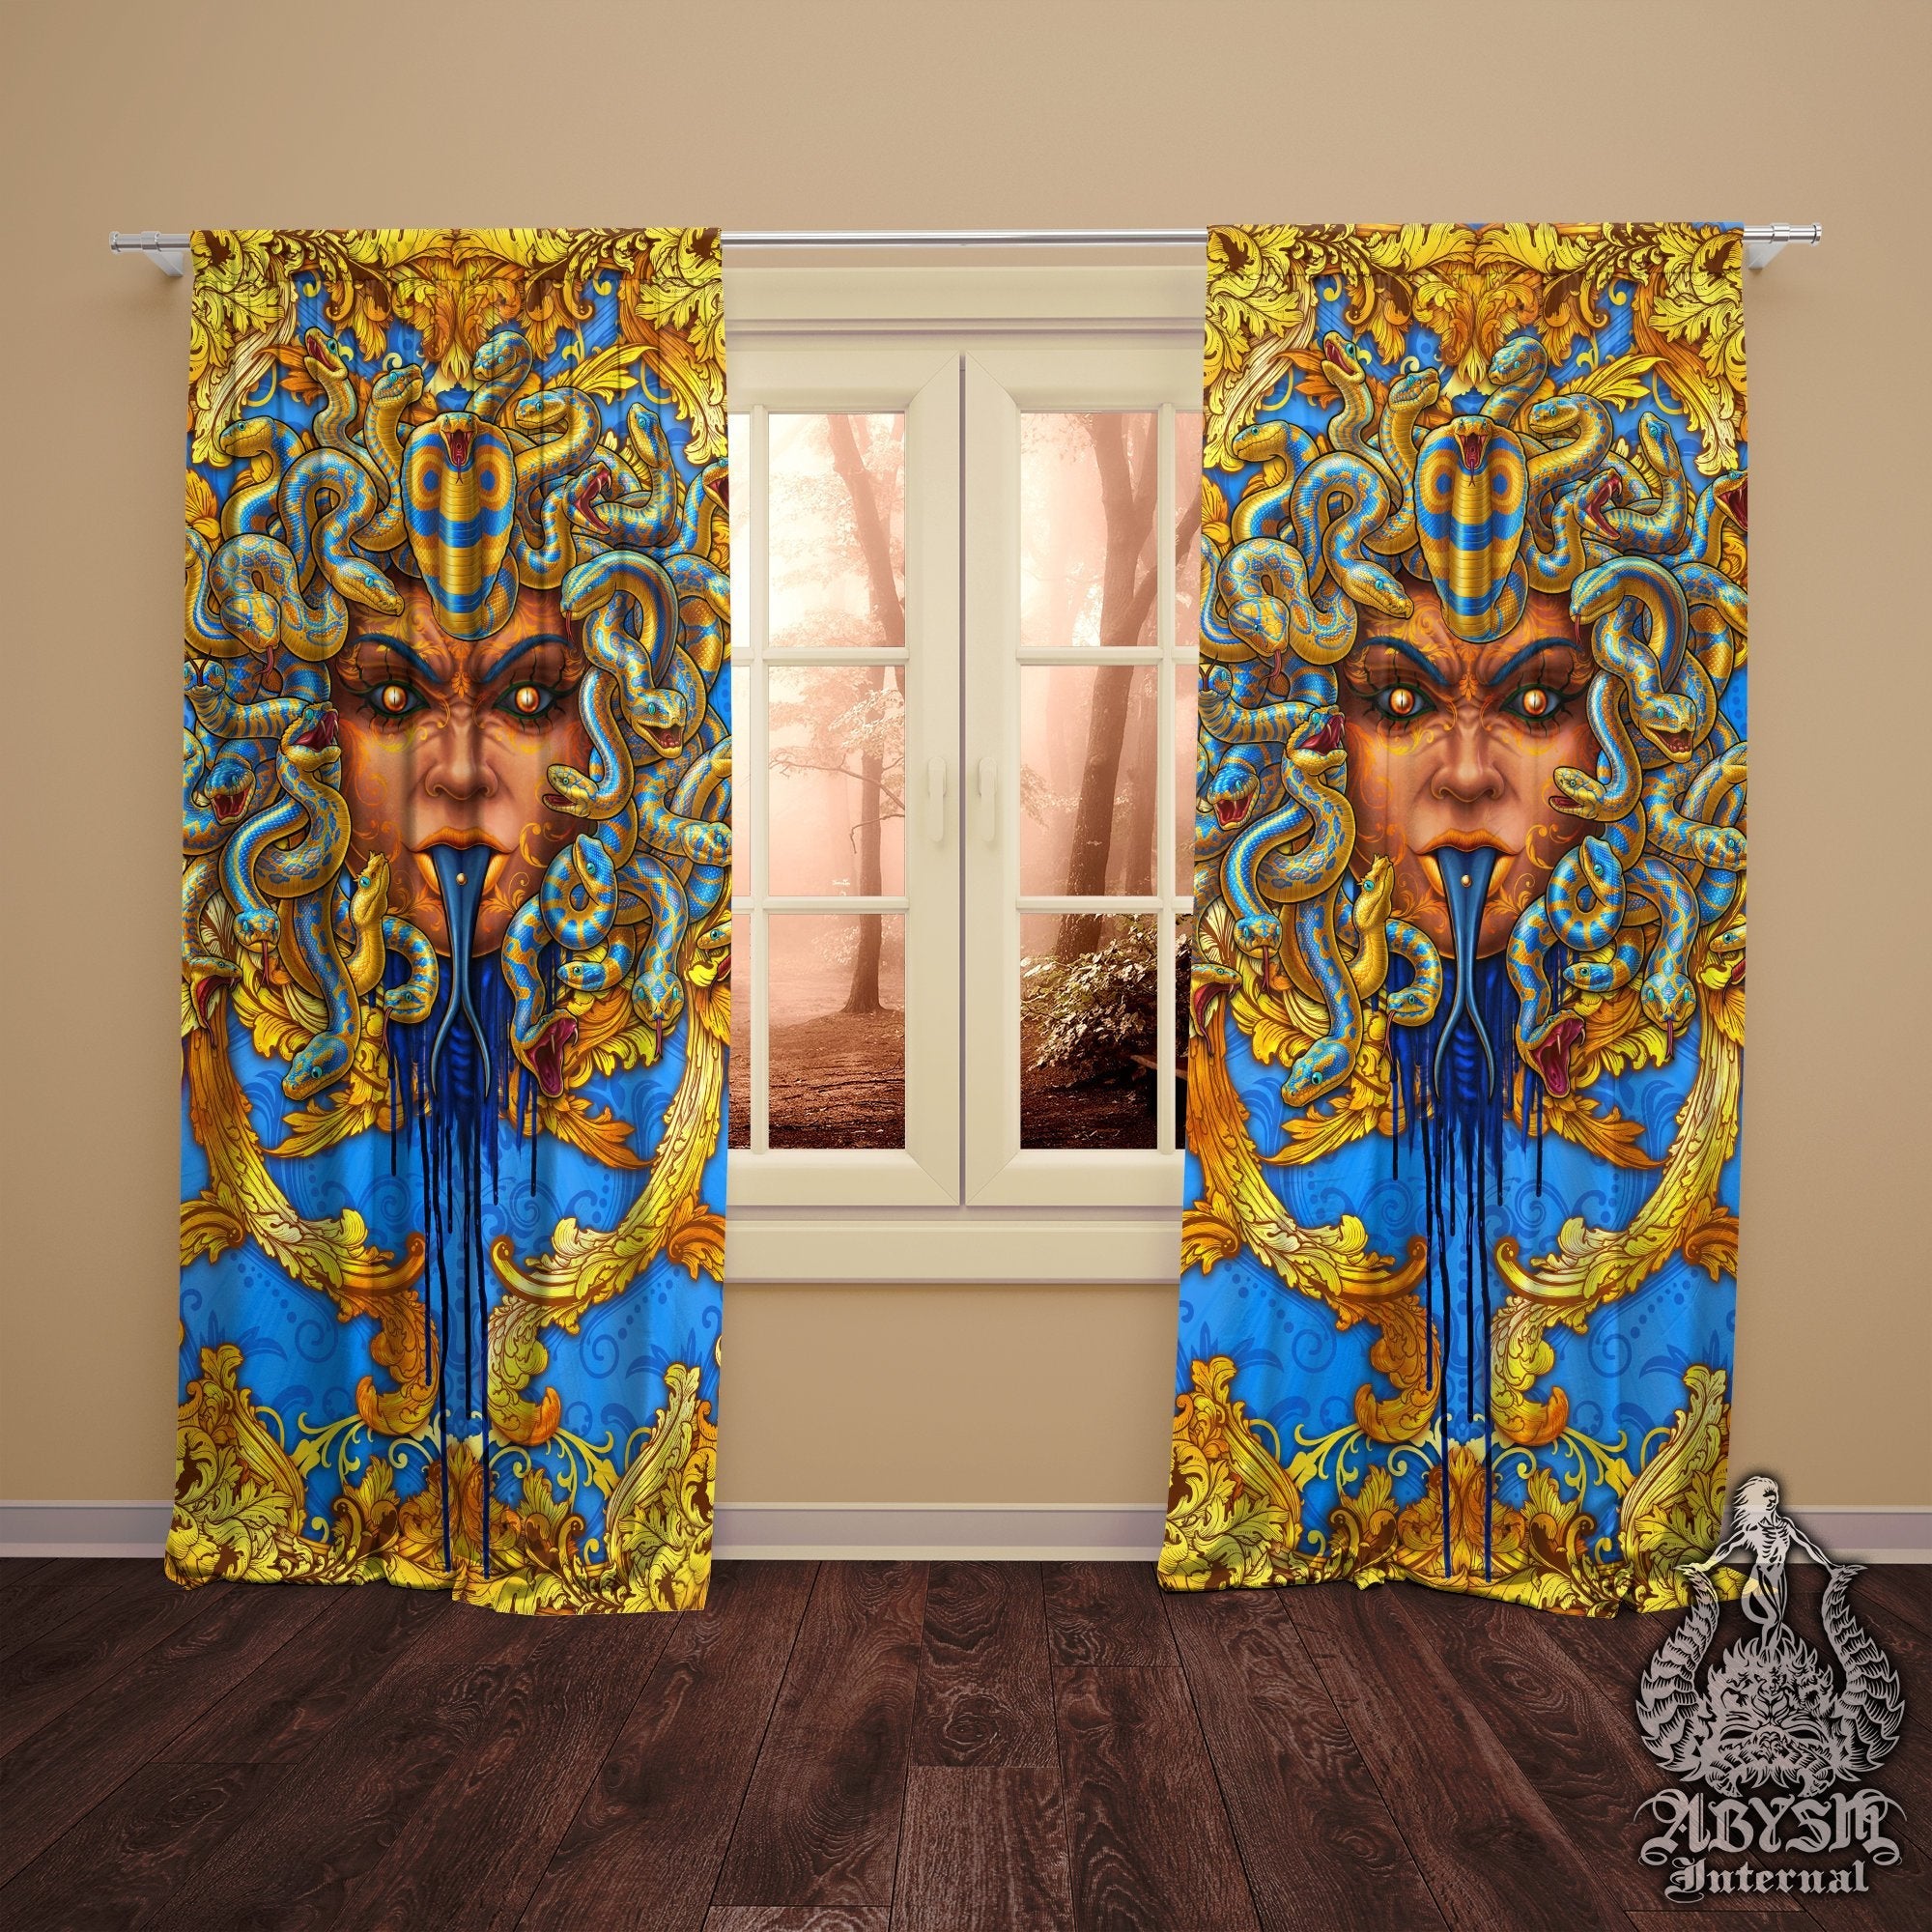 Medusa Blackout Curtains, Long Window Panels, Baroque Art Print, Vintage Room Decor, Funky and Eclectic Home Decor - Cyan & Gold Snakes - Abysm Internal